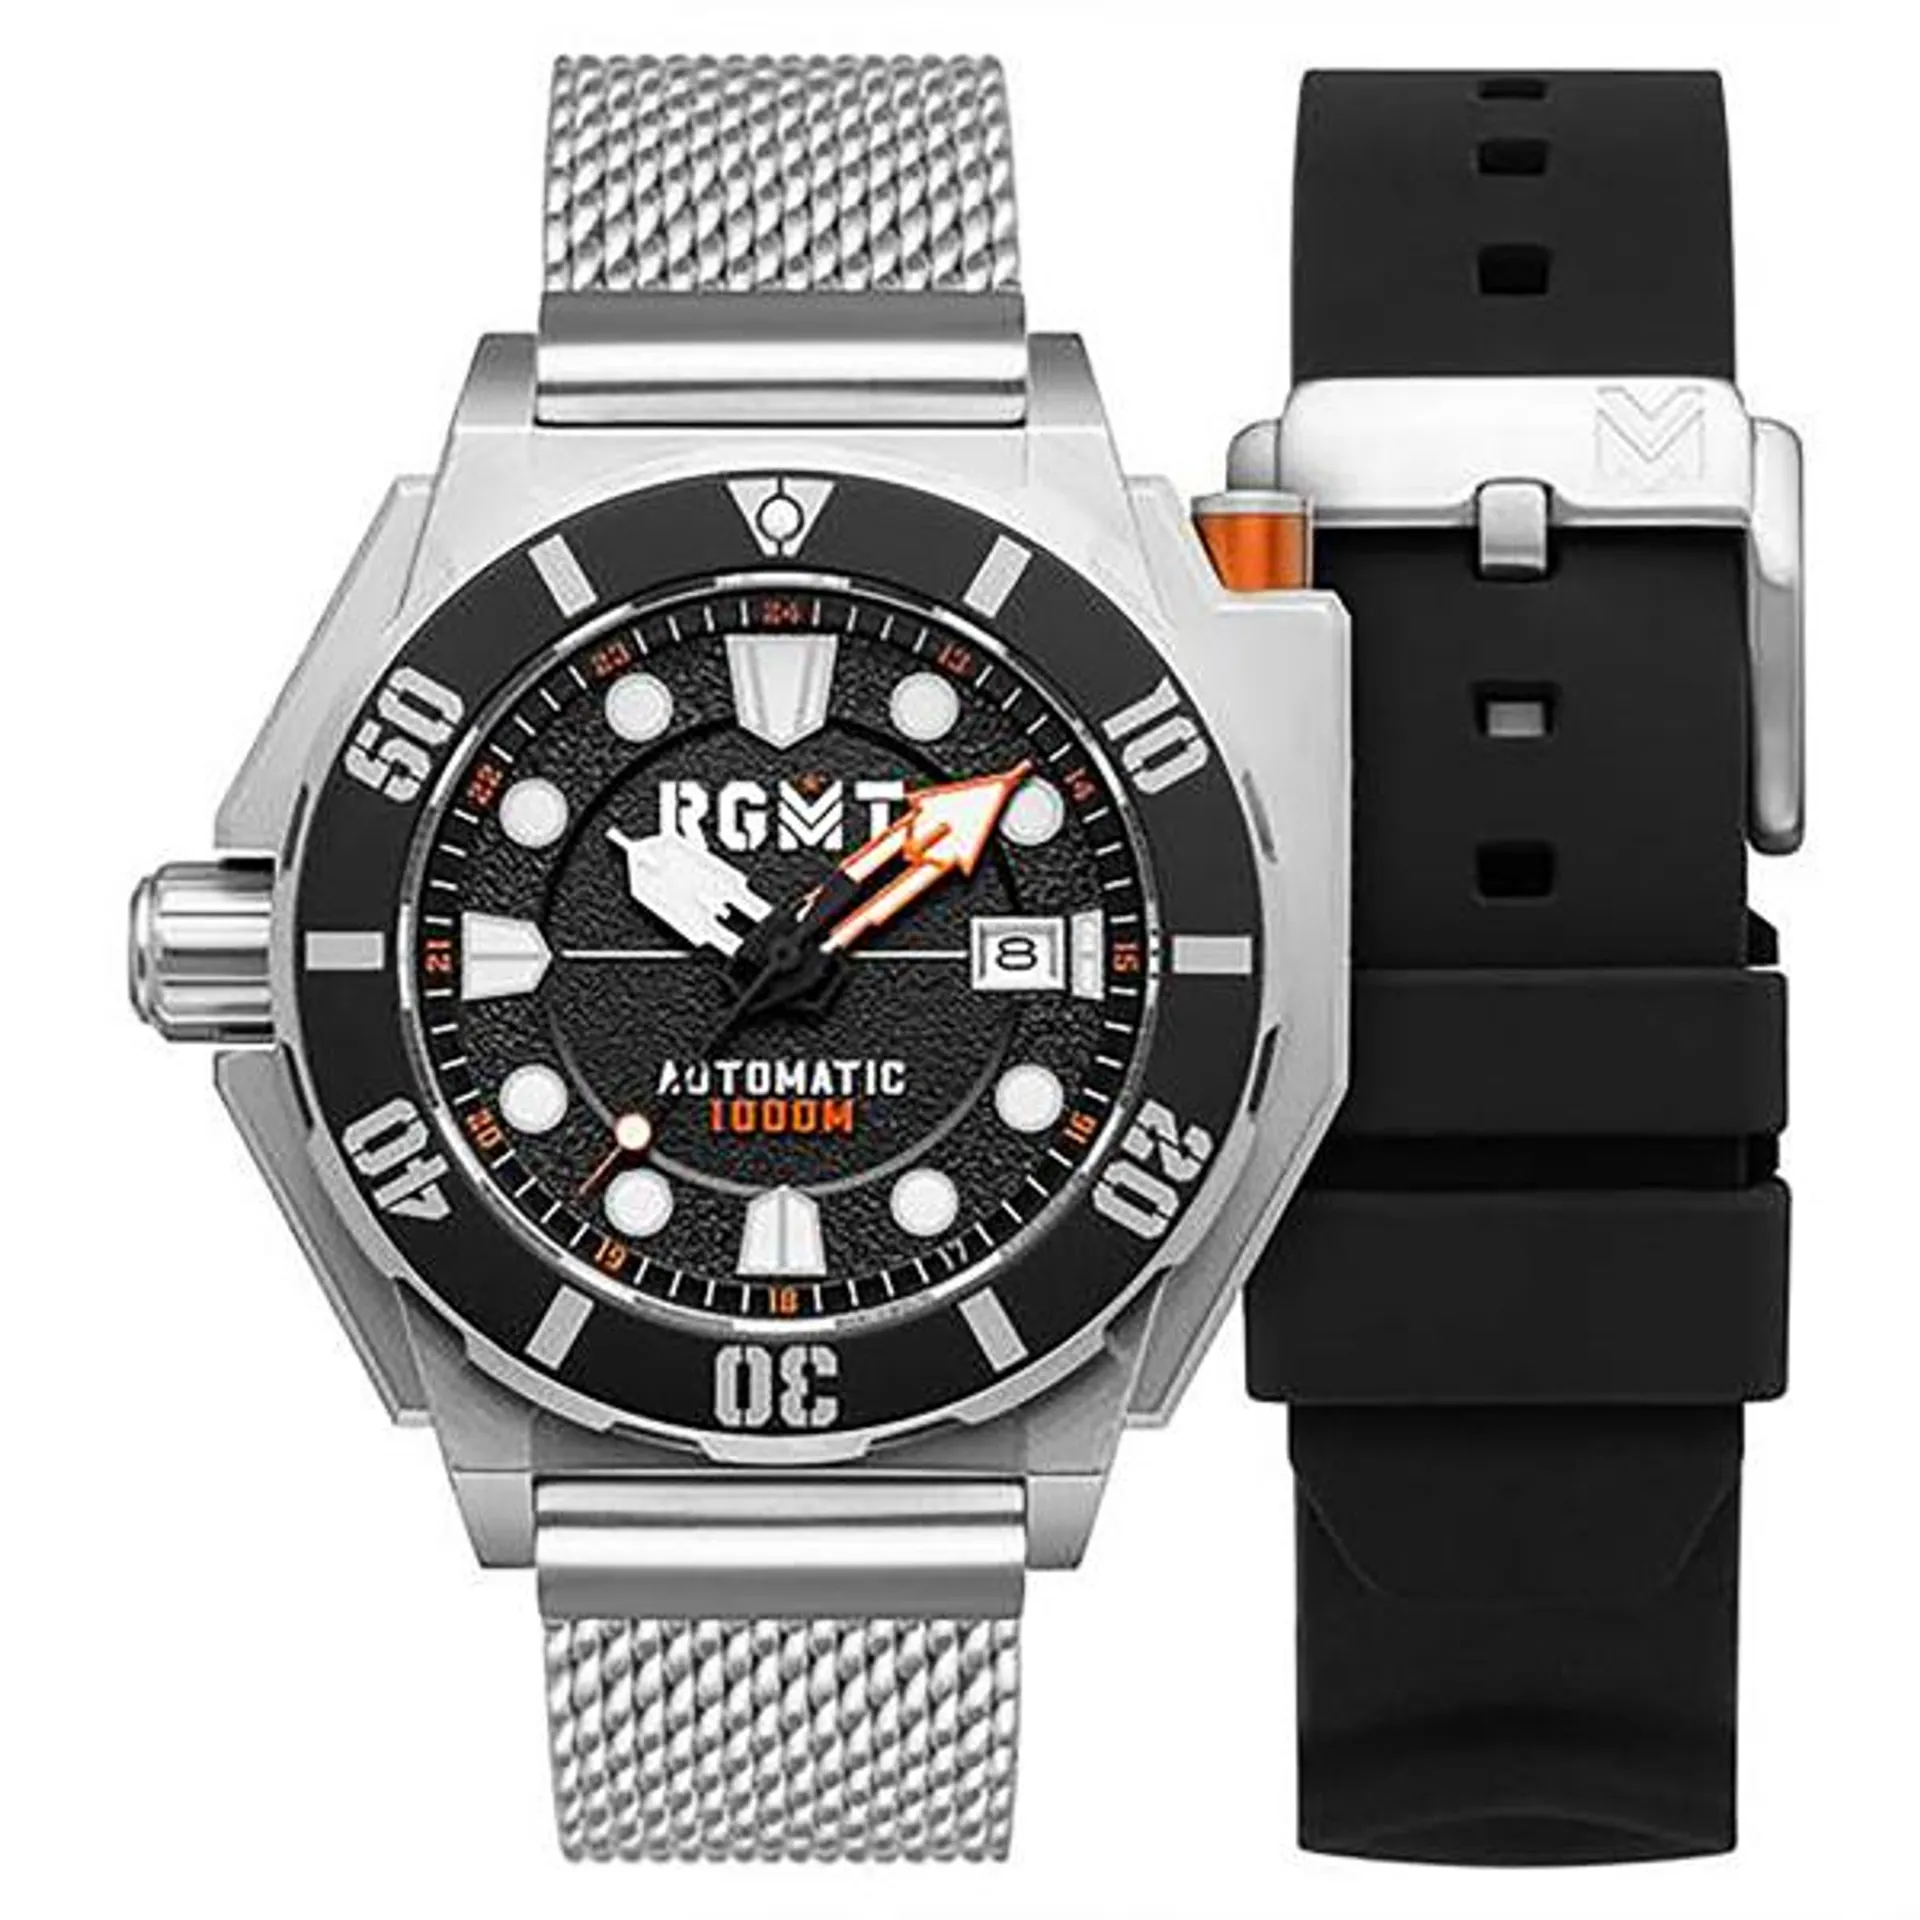 RGMT Gents Torpedo 1000m Automatic Watch with Milanese Bracelet, Extra Strap & Dry Box